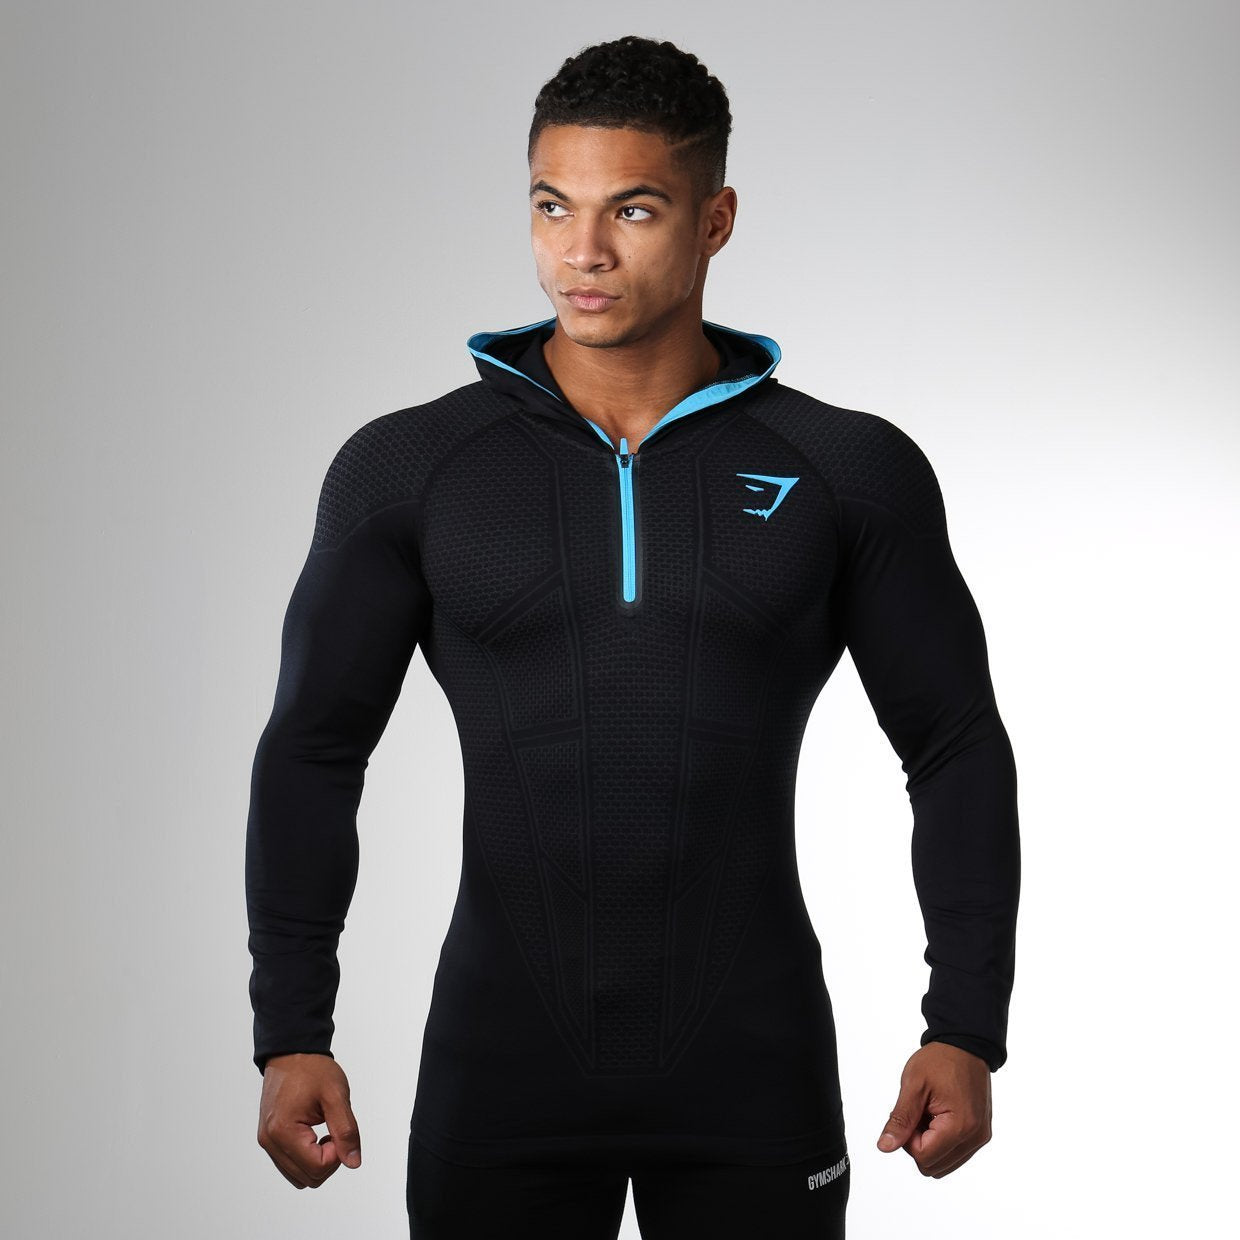 Gymshark - Out of this world. Order the impeccable Onyx Seamless